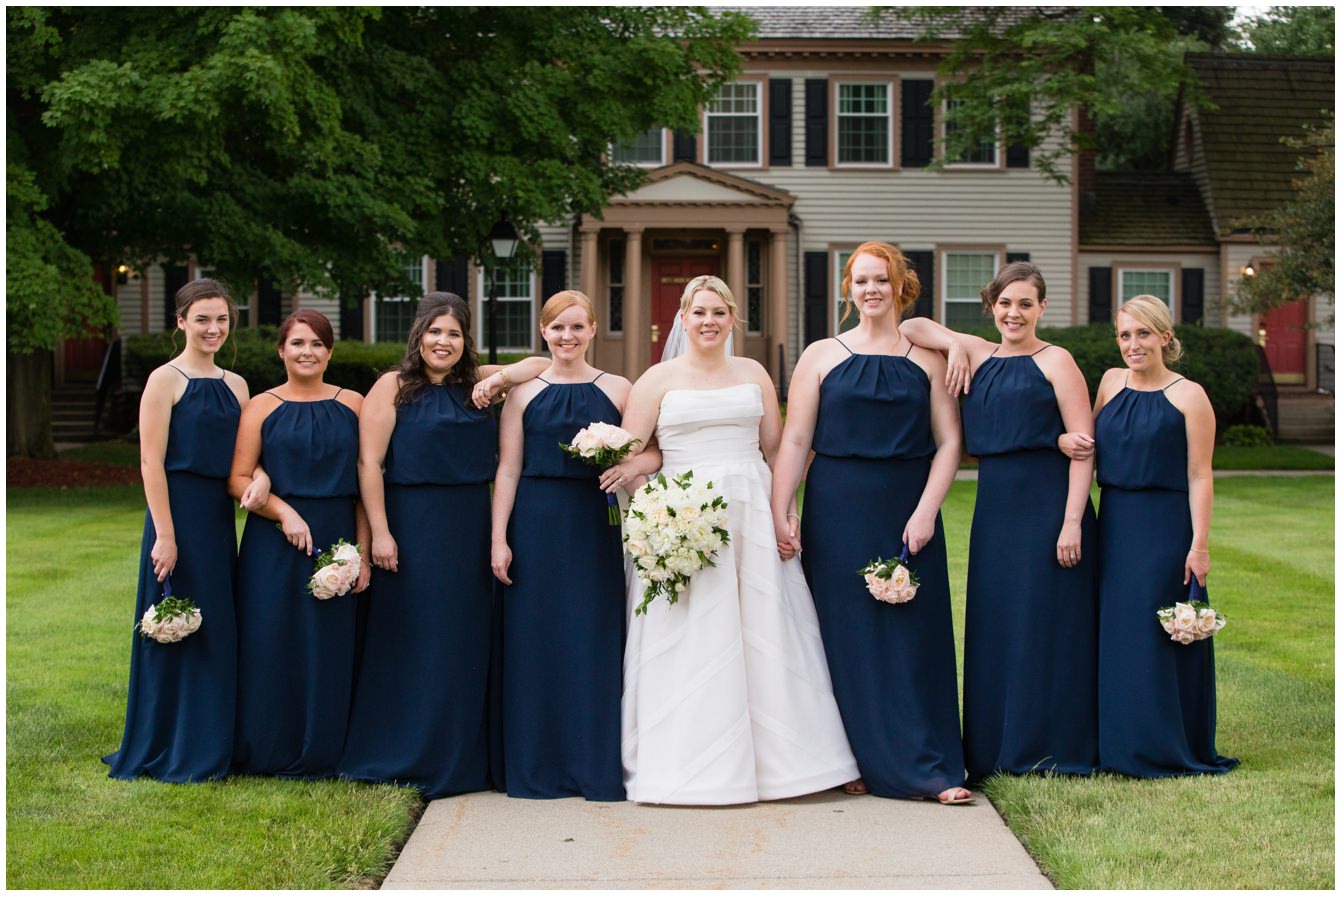 Bridesmaids with beautiful florals from Silk Thumb Florist at the Dearborn Inn